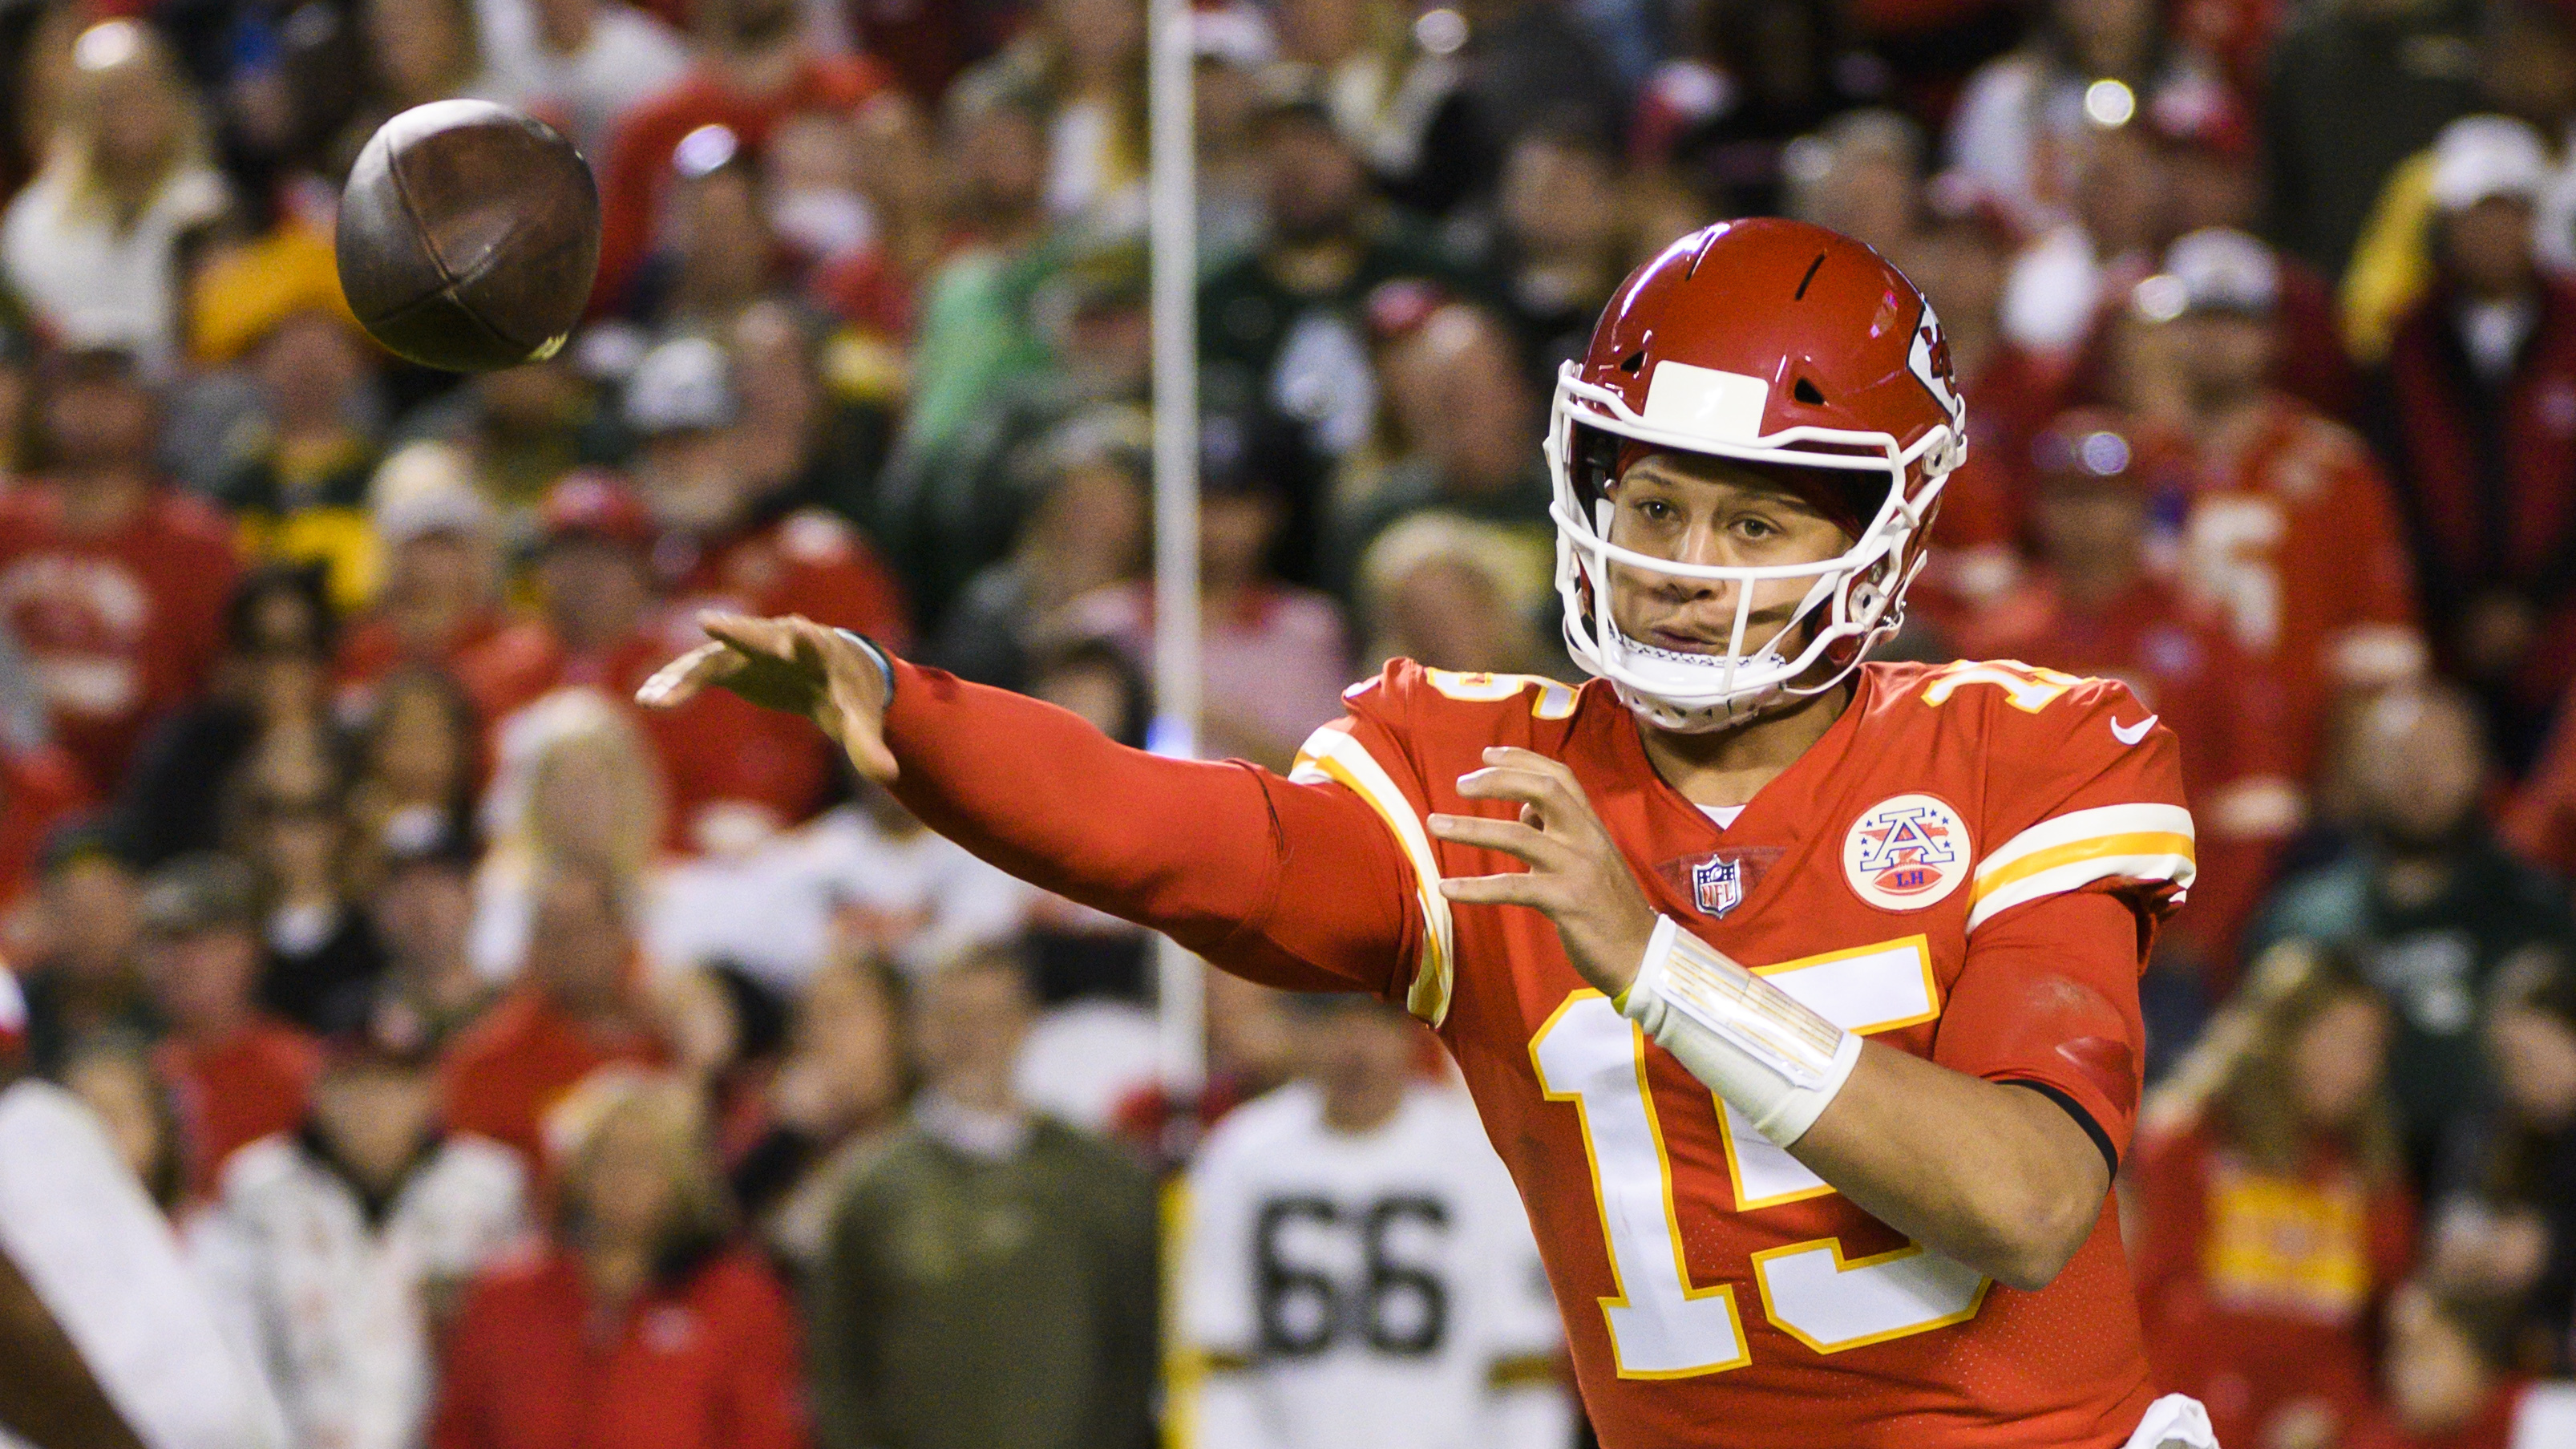 Chiefs' Patrick Mahomes: 'I just haven't played very good' amid 3